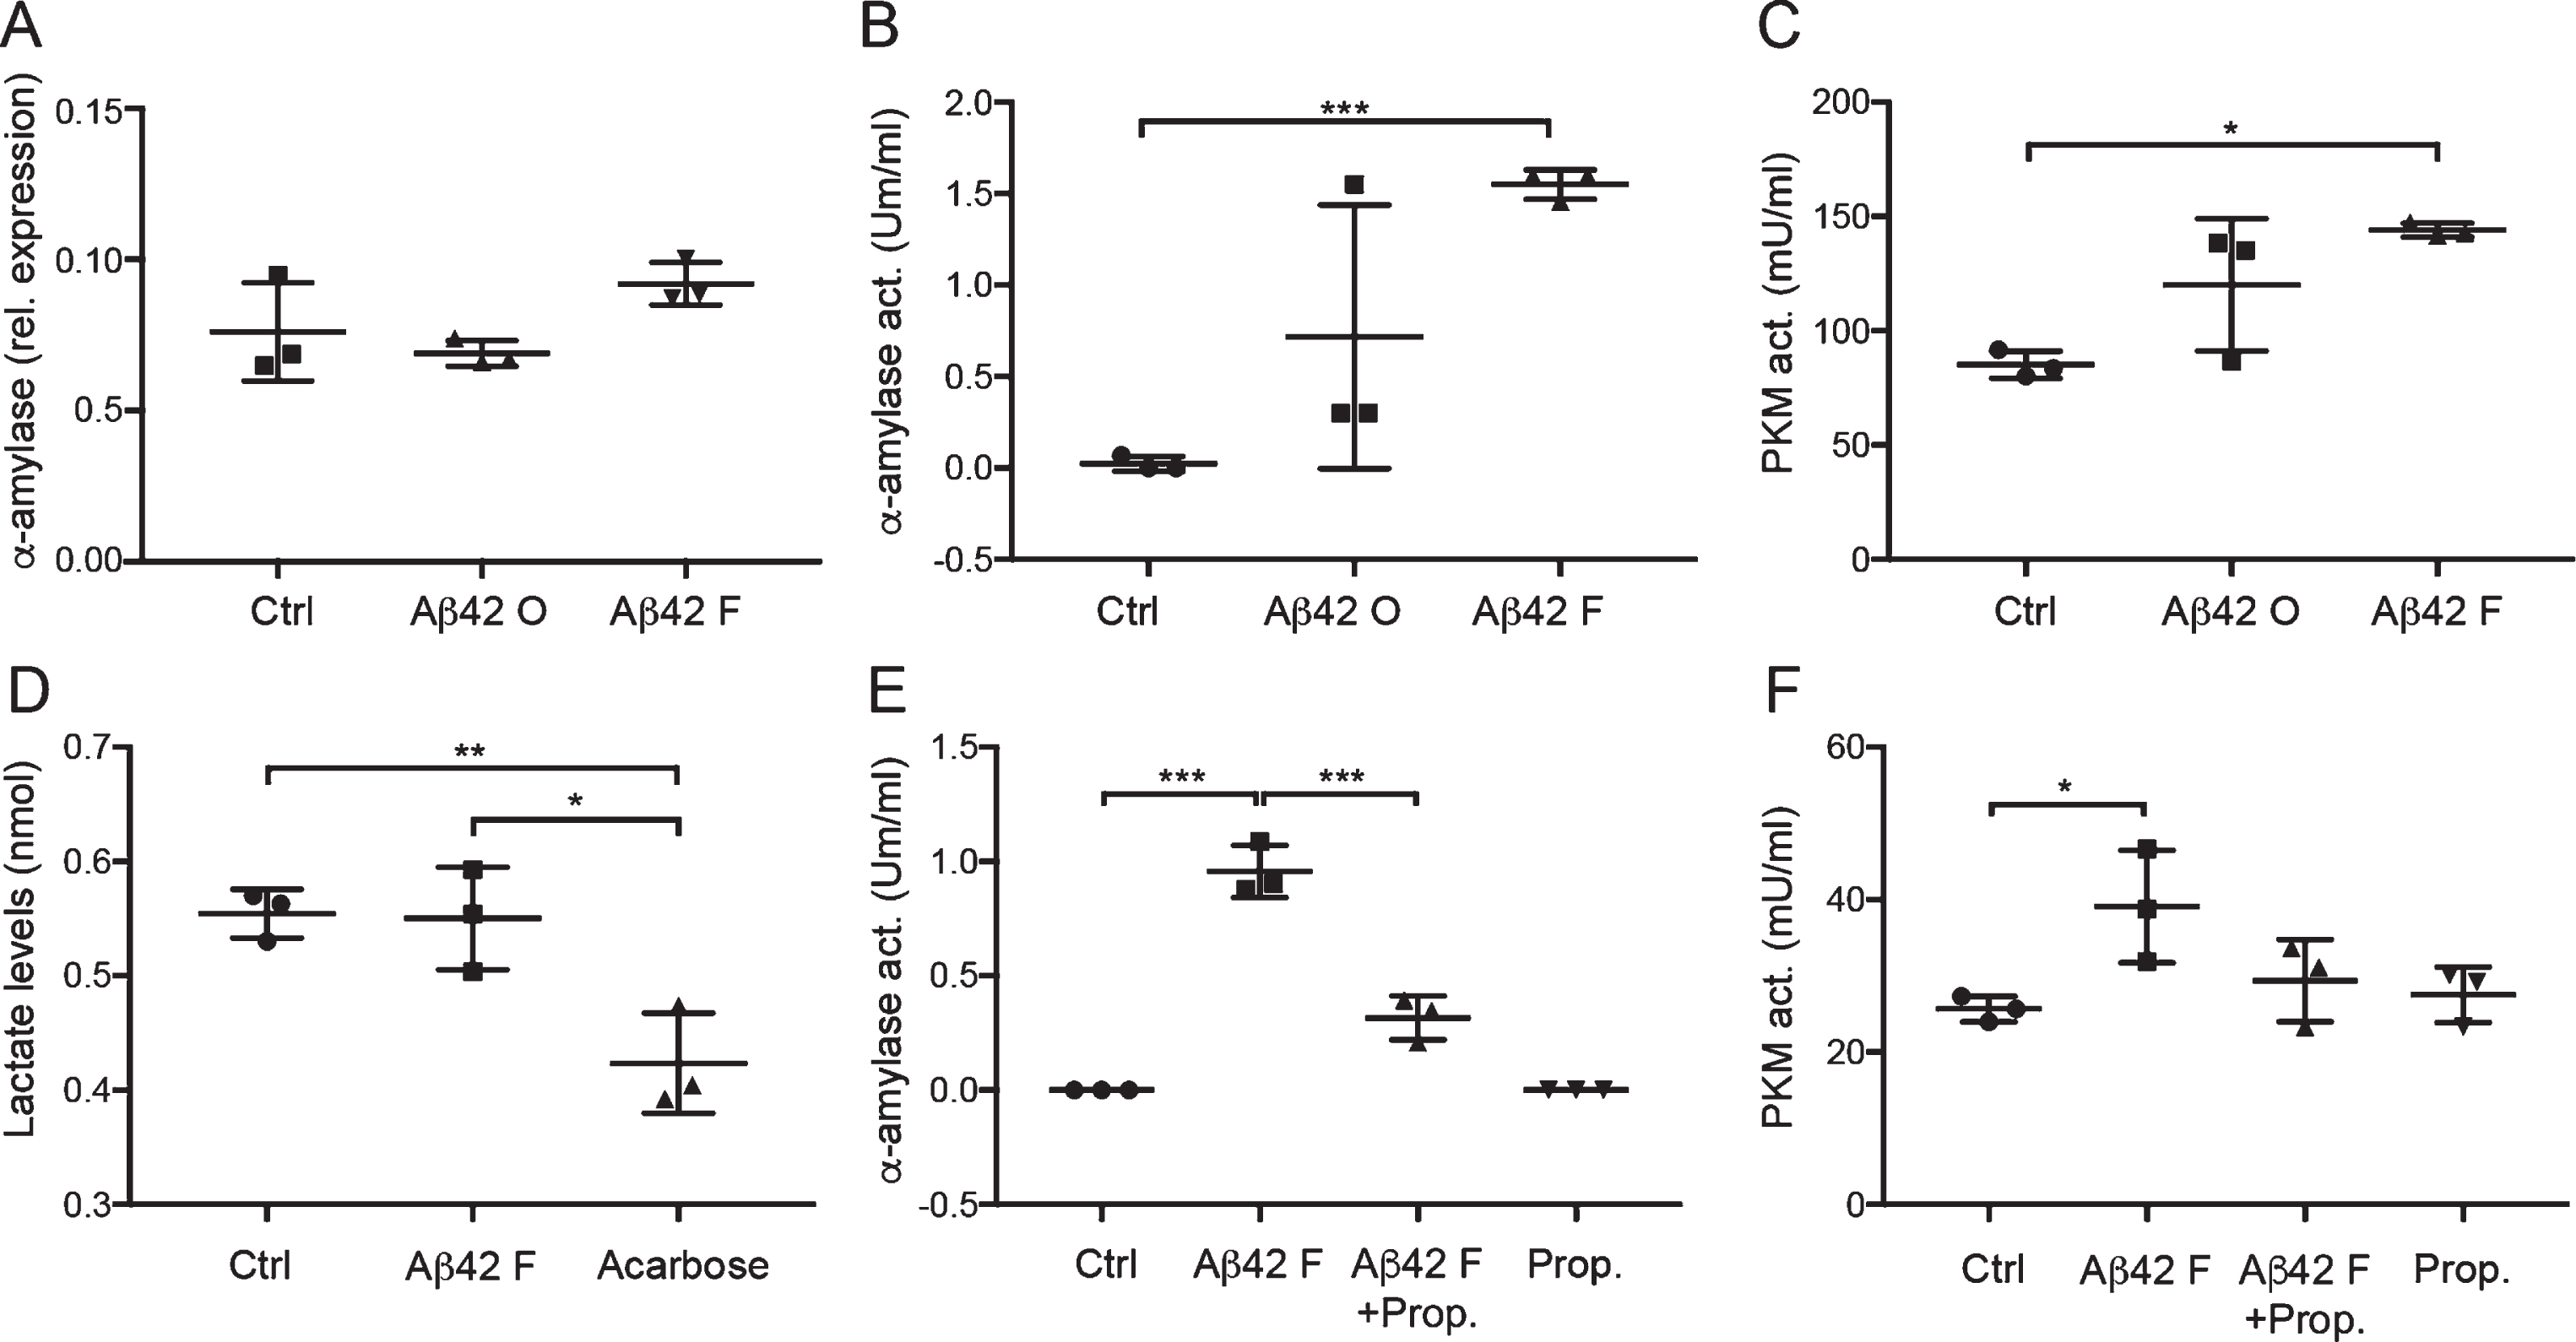 Unchanged gene expression but increased activity of α-amylase and glycolytic changes in cultured astrocytes after Aβ42 stimulation. Column scatter plot in (A) shows relative expression of α-amylase normalized against values of housekeeping genes ribosomal protein L13A (RPL13A) and hydroxymethylbilane synthase (HMBS) in HA stimulated with control (Ctrl), 10 μM Aβ oligomers (Aβ42 O), and 10 μM Aβ42 fibrils (Aβ42 F). No significant difference was seen between the stimulations. Column scatter plot in (B) shows the change in α-amylase activity seen in stimulated HA cells. Aβ42 F stimulated HA showed significantly higher α-amylase activity compared with Ctrl. Column scatter plot in (C) shows the change in pyruvate kinase (PKM) activity seen in stimulated HA cells. Aβ42 F significantly increased PKM activity in HA stimulated with Aβ42 F compared with Ctrl. Column scatter plot in (D) shows the unaltered lactate levels in cell culture medium after stimulation with Aβ42 F, but reduced lactate levels after stimulation with the negative control 5 μM acarbose. Column scatter plot in (E) shows the inhibiting impact of 1 μM propranolol (Prop.) on Aβ42 F induced α-amylase activity, were propranolol counteracted the Aβ42 F- induced α-amylase activity. Column scatter plot in (F) shows the PKM activity in HA after stimulation with propranolol and Aβ42 F. The experiments were performed independently three times with two replicates. Data was analyzed using one-way ANOVA with Tukey post-test and presented as mean±SD. *p < 0.05, **p < 0.01, ***p < 0.001.